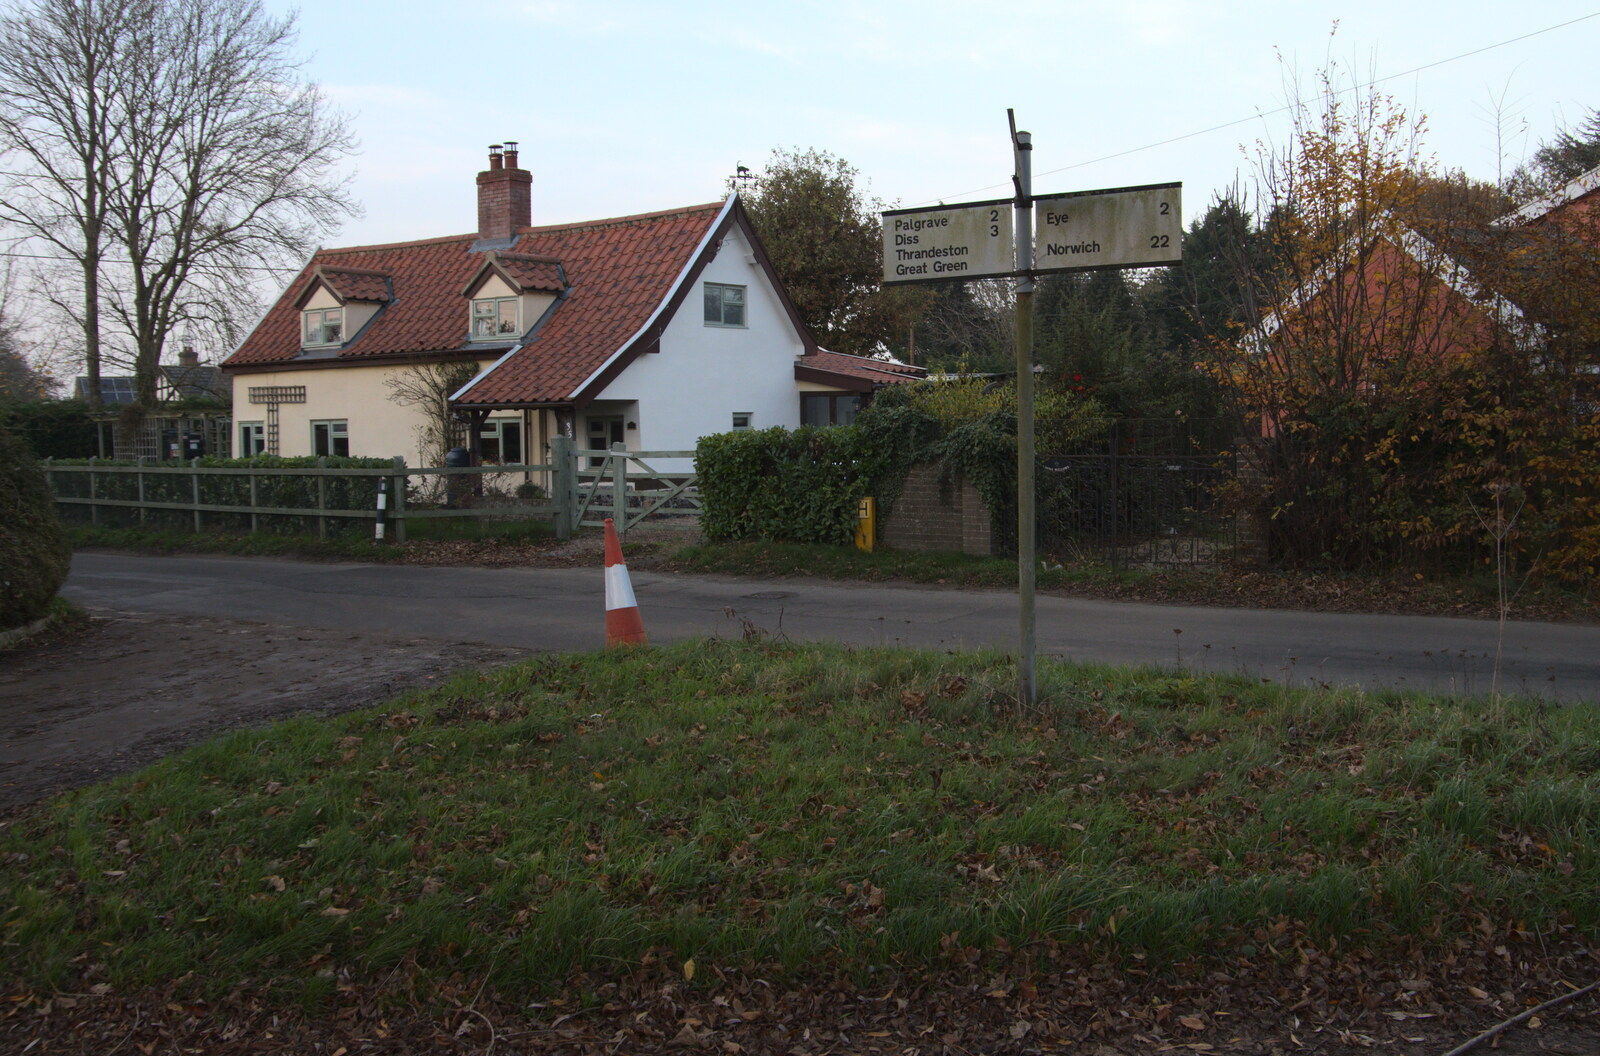 The junction at Honeysuckle Cottage from To See the Hairy Pigs, Thrandeston, Suffolk - 7th November 2020